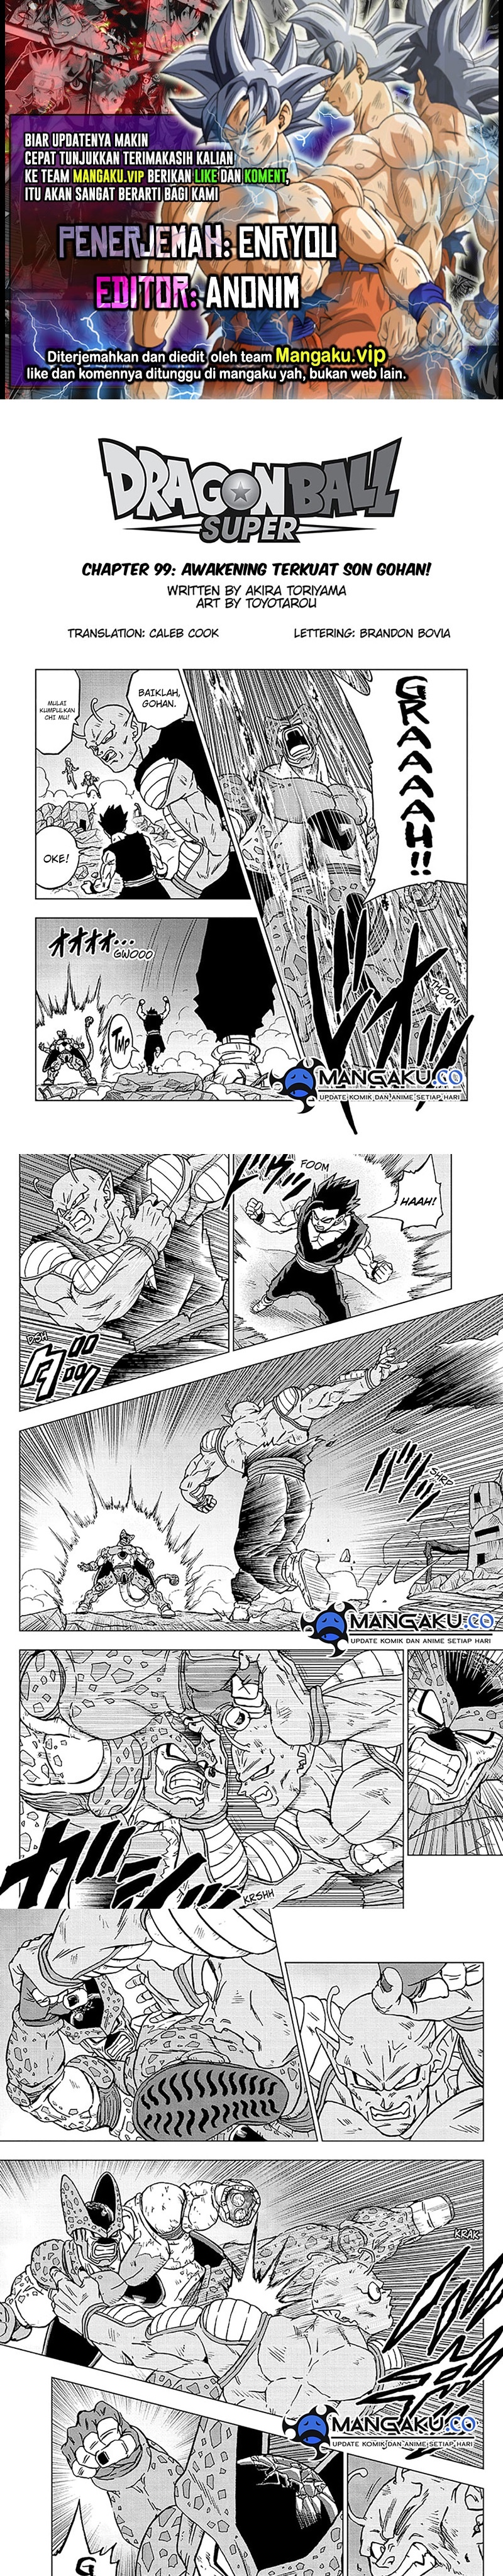 Dragon Ball Super: Chapter 99 - Page 1